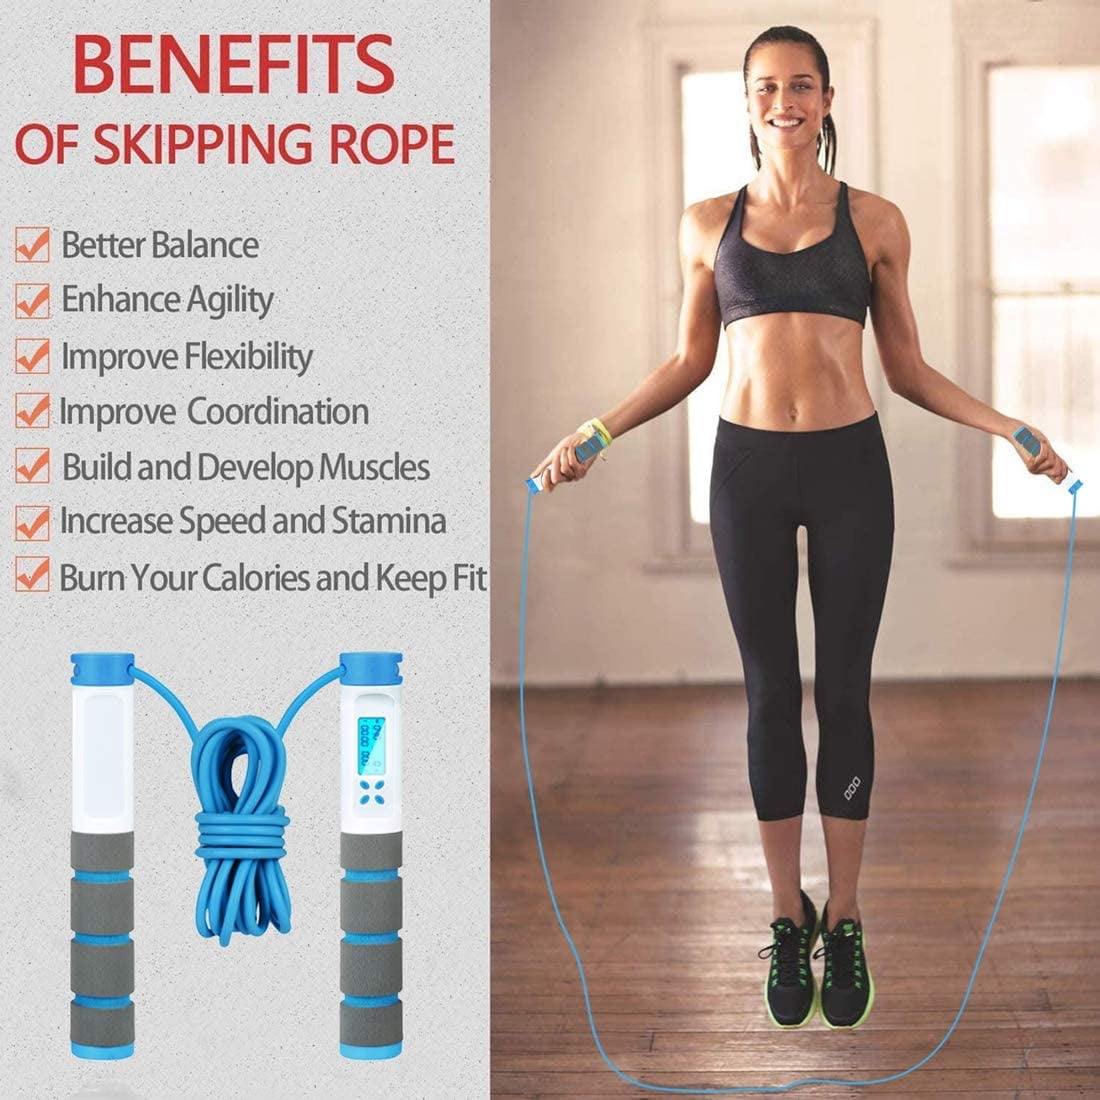 Fitness Women Jumping Rope for Men Jump Rope Skipping Rope with Calorie Counter Endurance Training Cordless Jump Rope for Speed Training Weighted Jump Rope Adjustable Length 